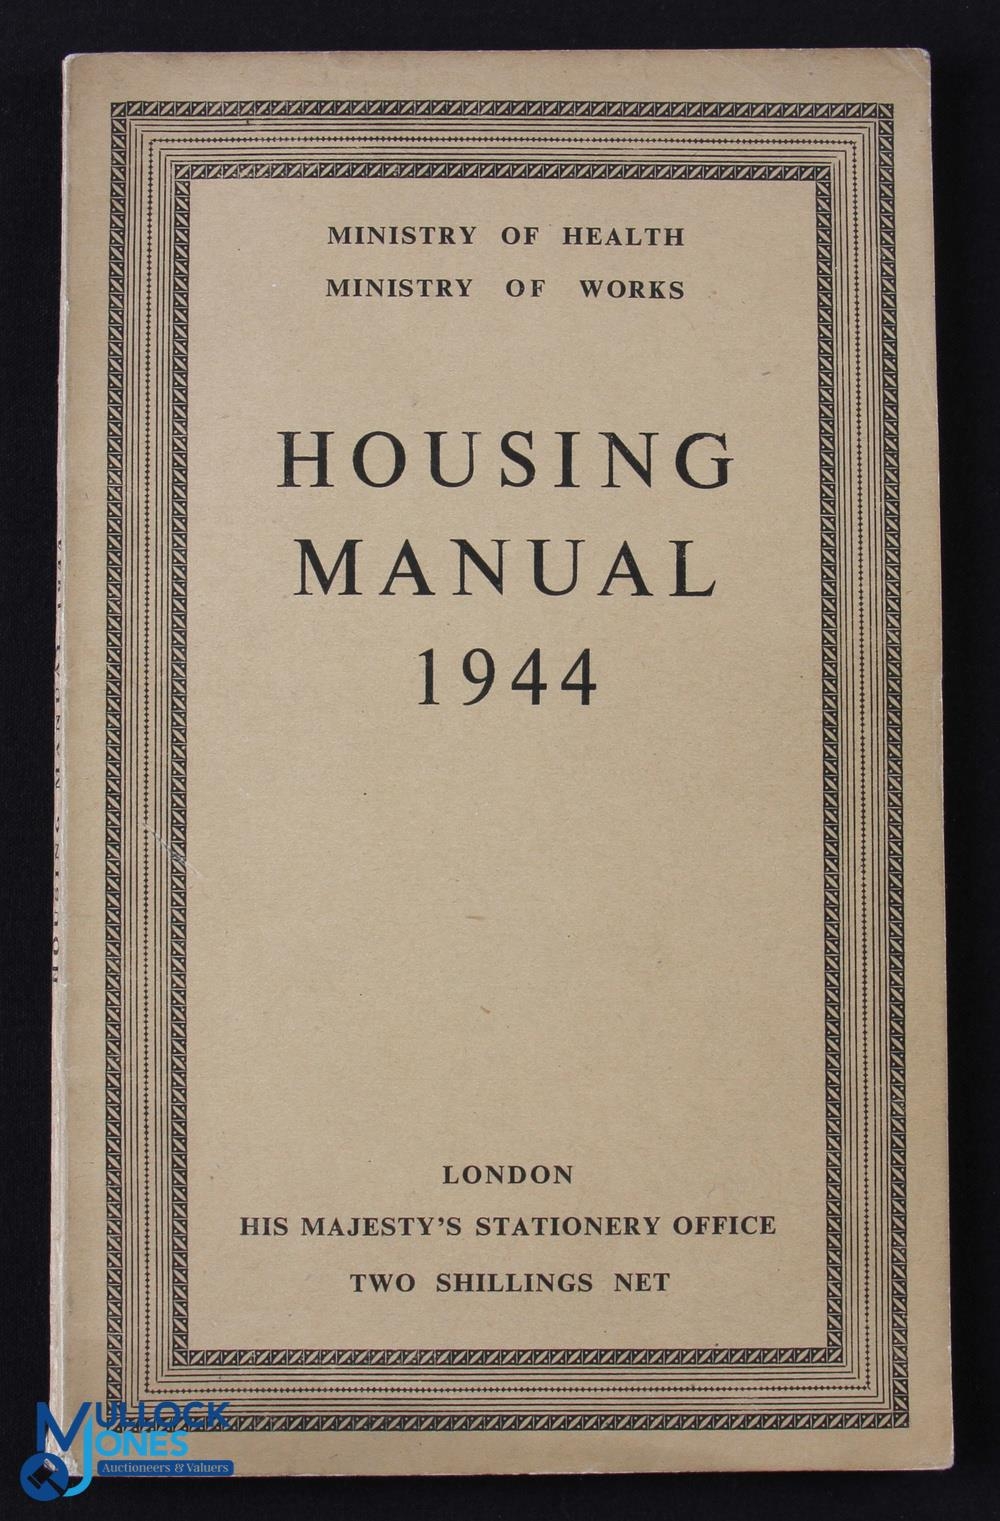 Housing Manual published for the Ministry of Works 1944. An extensive 104 page publishment with 24